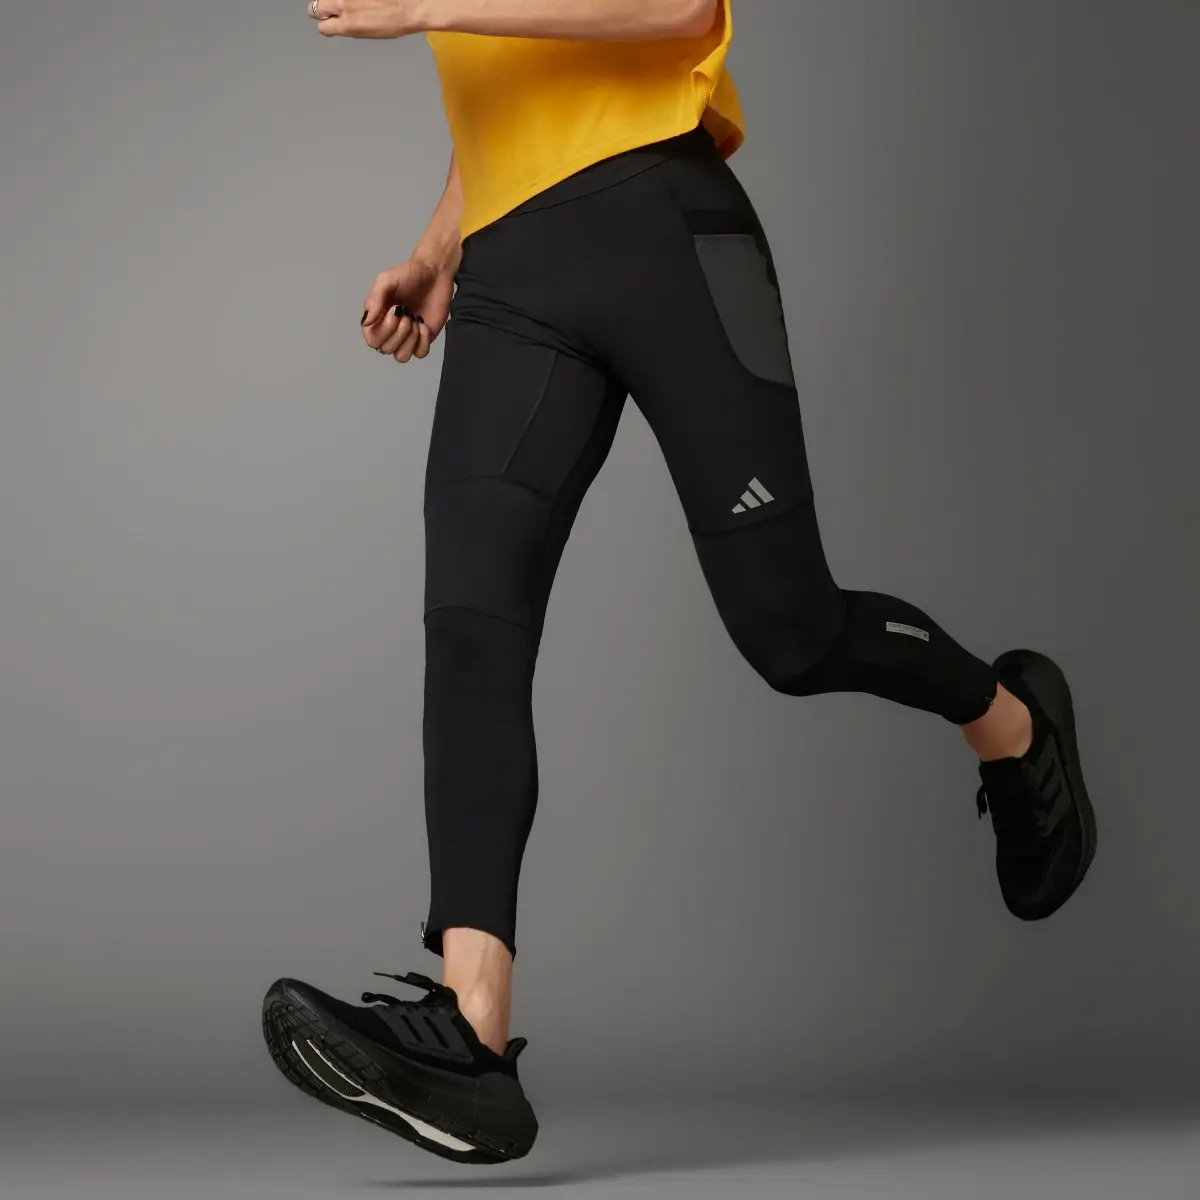 Adidas Ultimate Running Conquer the Elements COLD.RDY Leggings. 3